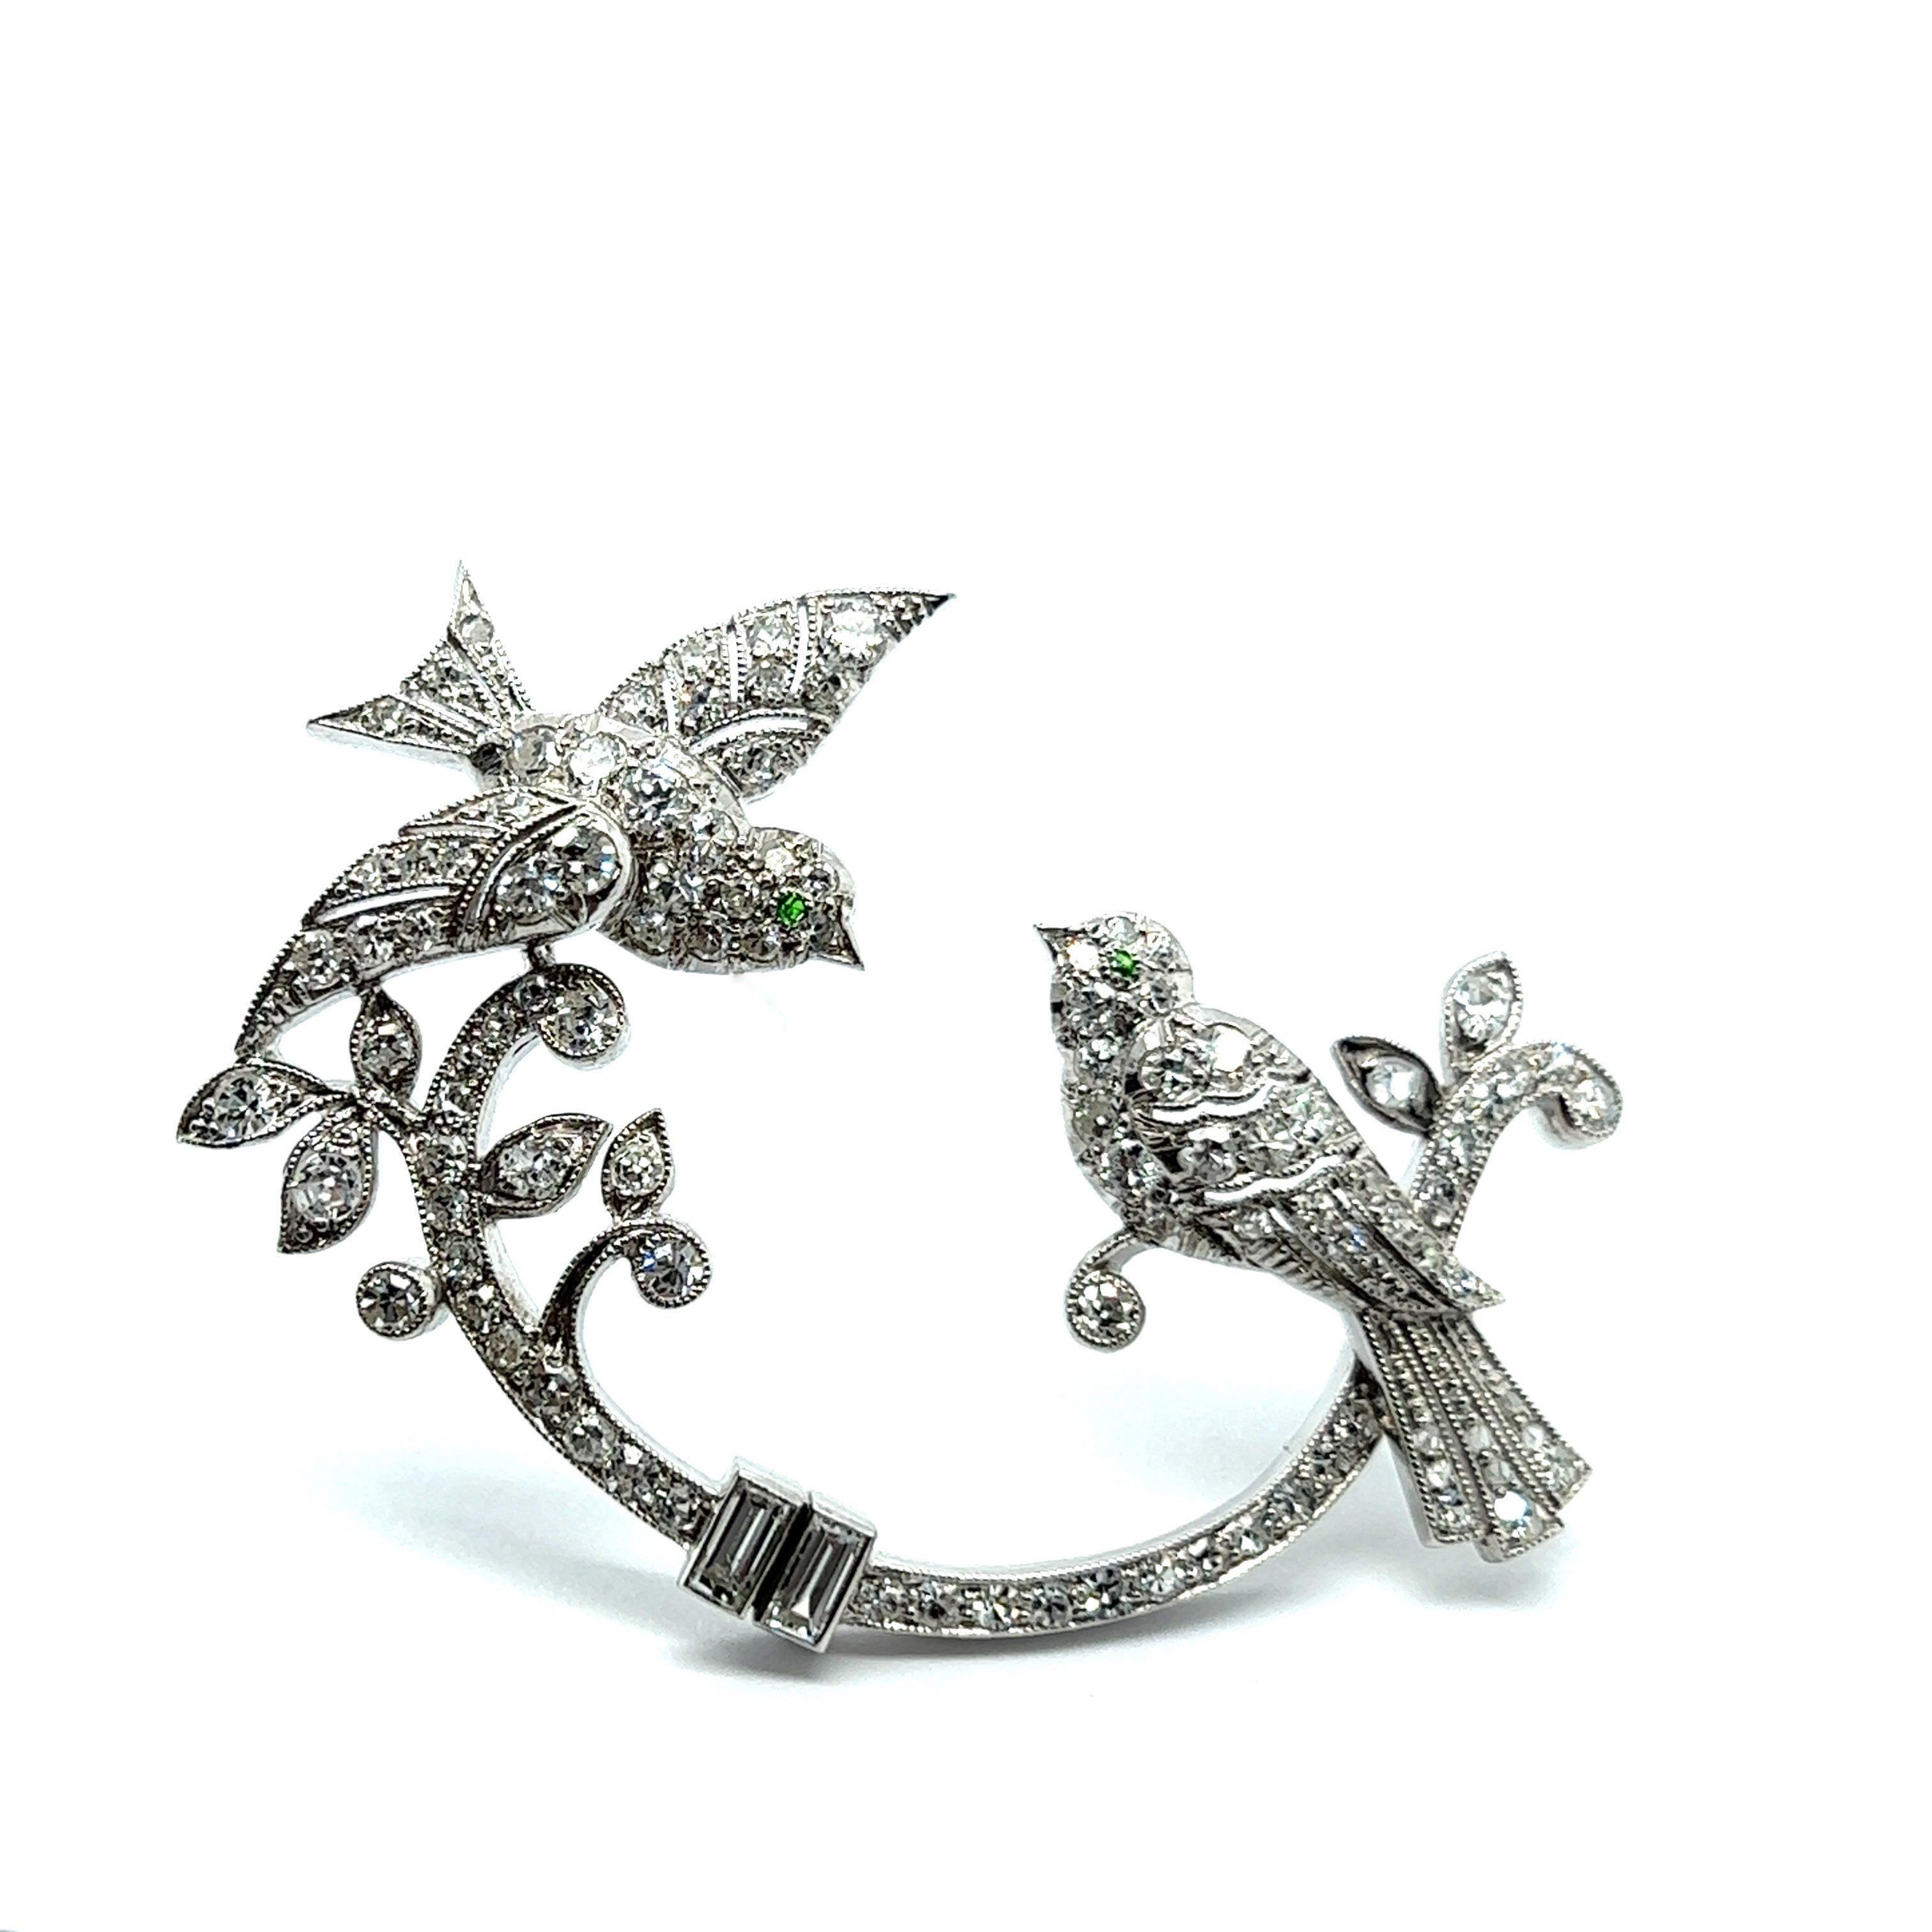 Exquisite antique brooch with diamonds steeped in history and rich symbolism. This captivating piece highlights a motif of two lifelike birds gracefully perched on a beautifully rendered branch. The symbolism of birds in jewelry dates back